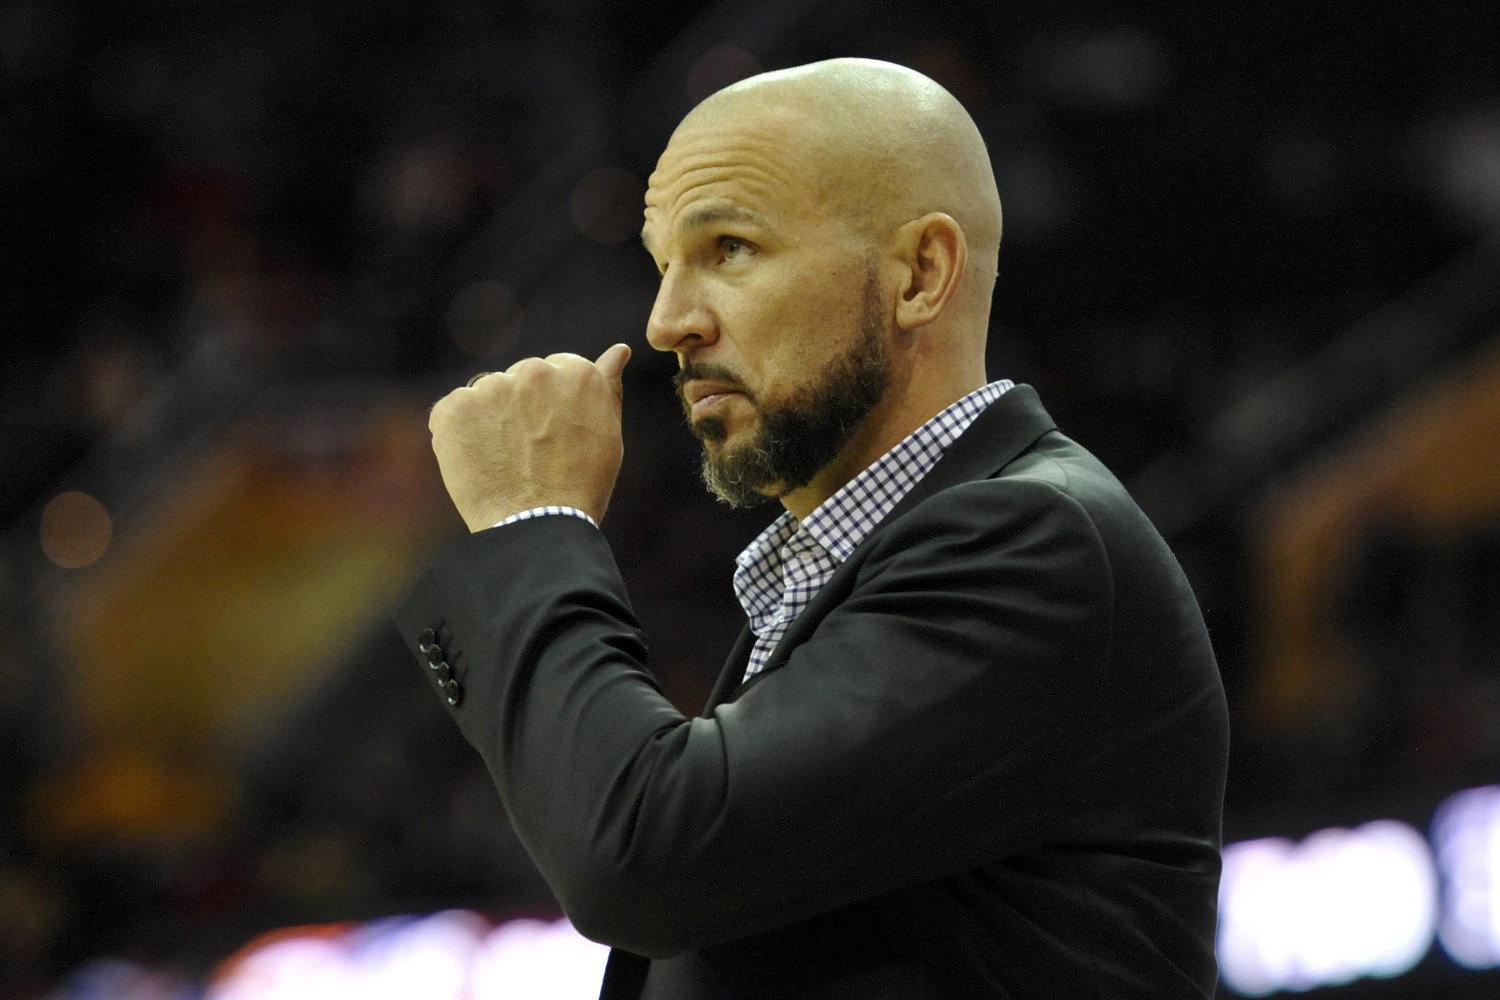 Can Jason Kidd lead the Nets to the promised land as a coach? Photo by David Richard, USA Today Sports Images